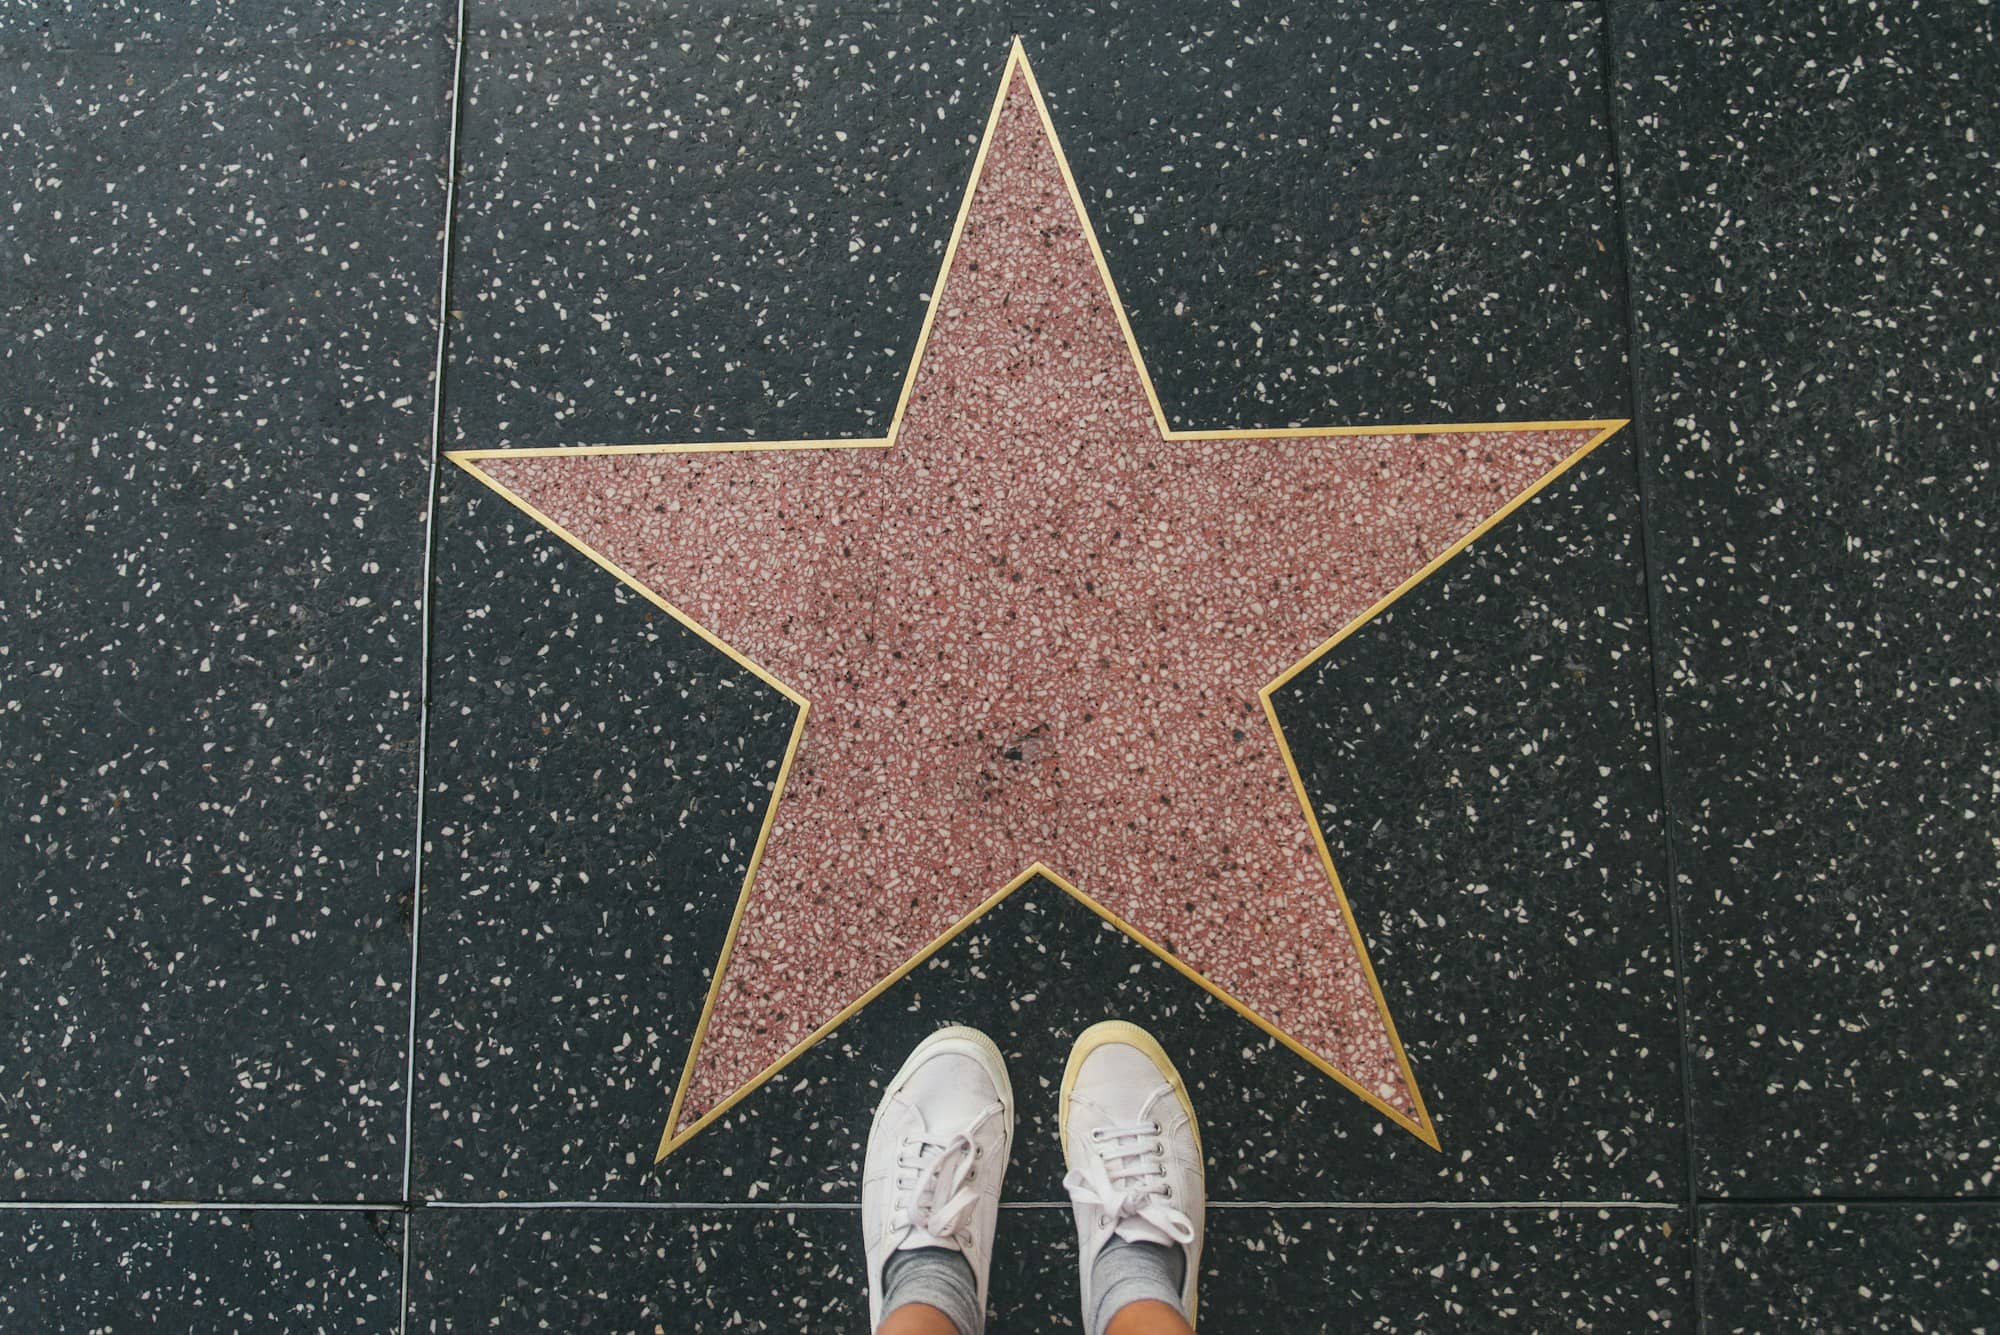 Star on Walk of Fame, Hollywood